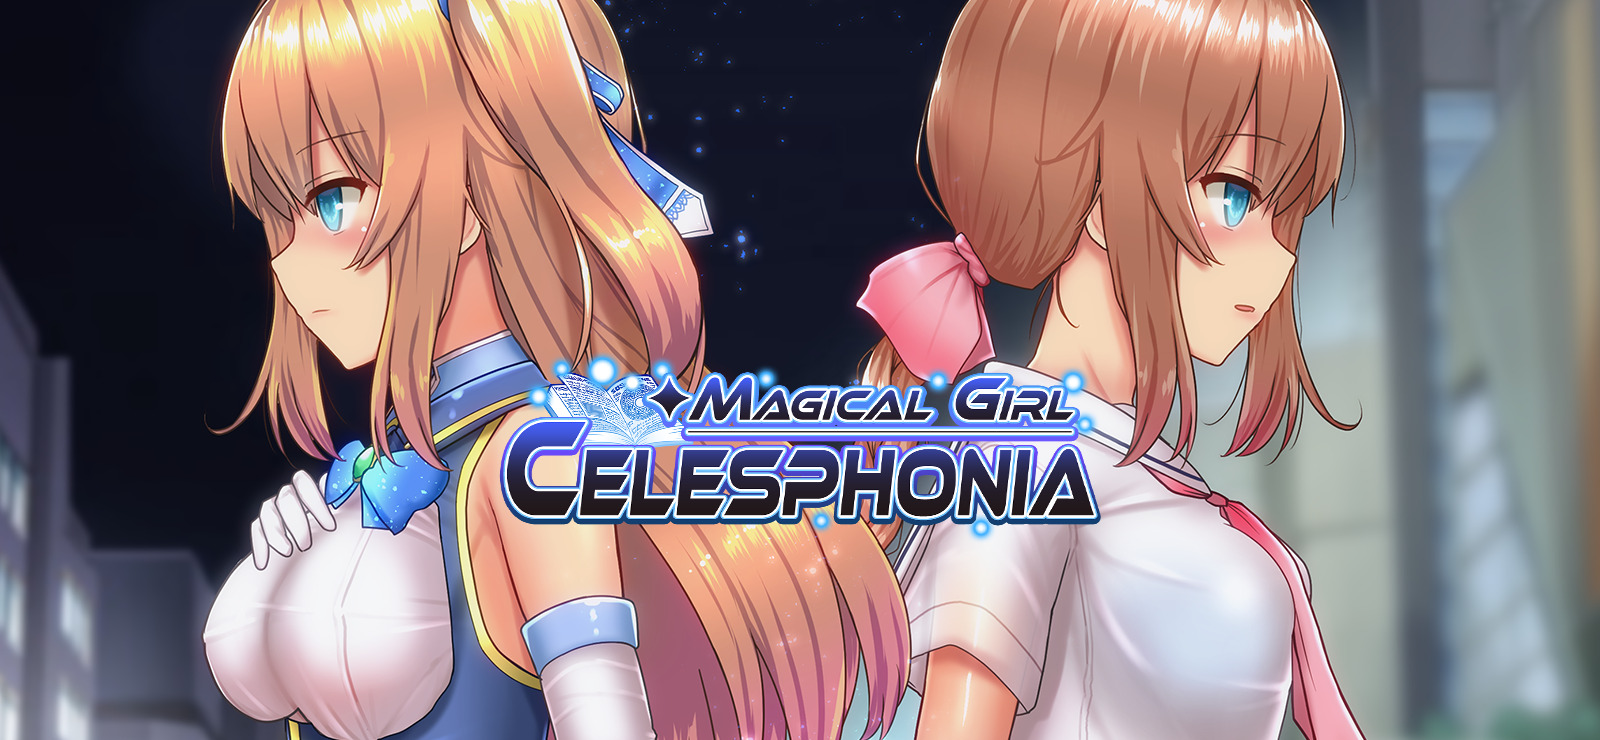 Magical girl celesphonia unrated